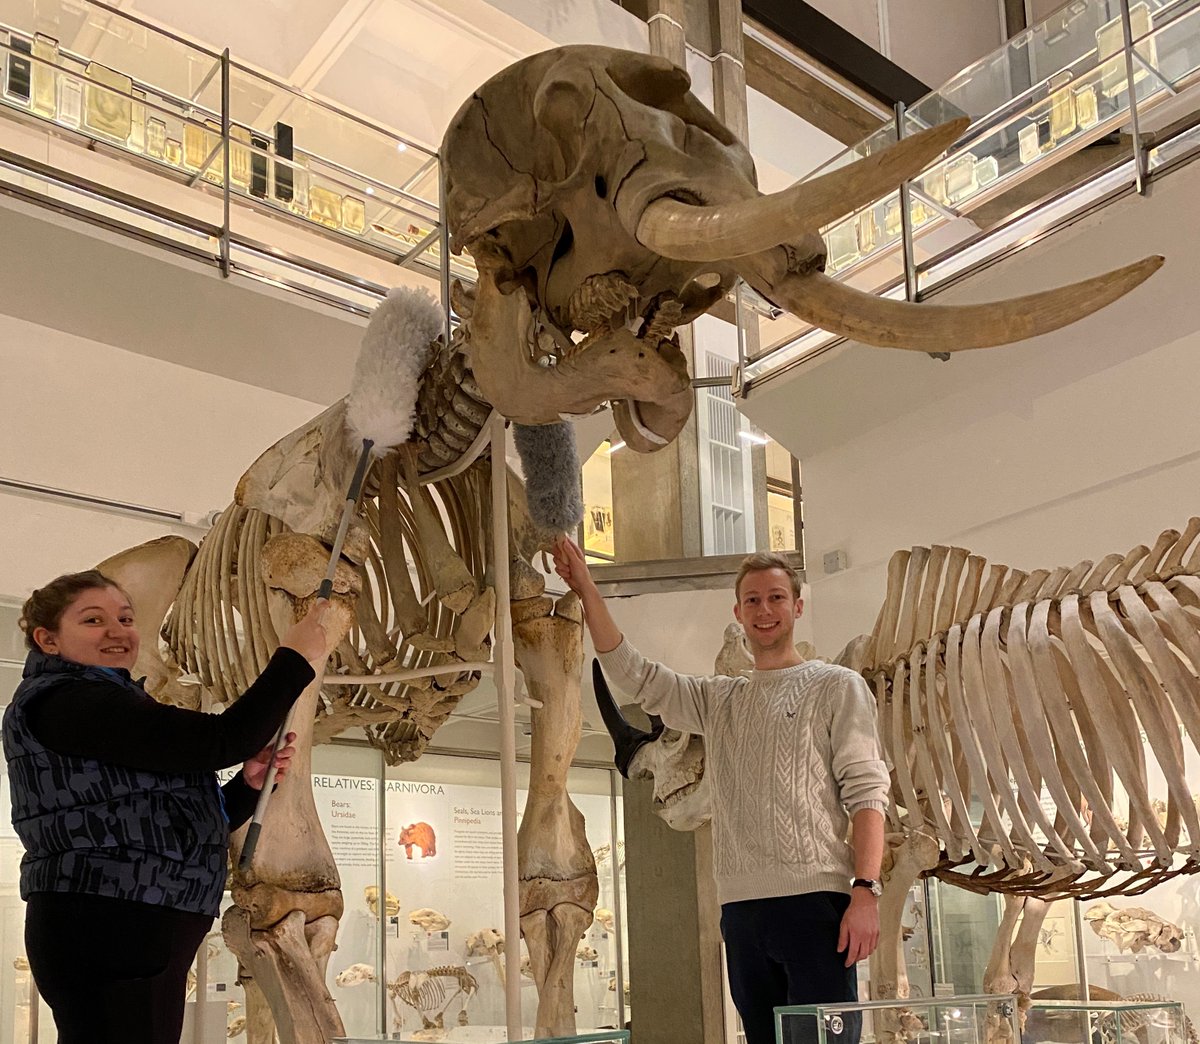 This is not your normal everyday dusting job! We're dusting the elephants this morning🐘🐘🐘 Museum closed this week, we re-open on Saturday 20 Jan. The Whale Café open as usual. @CamUnivMuseums